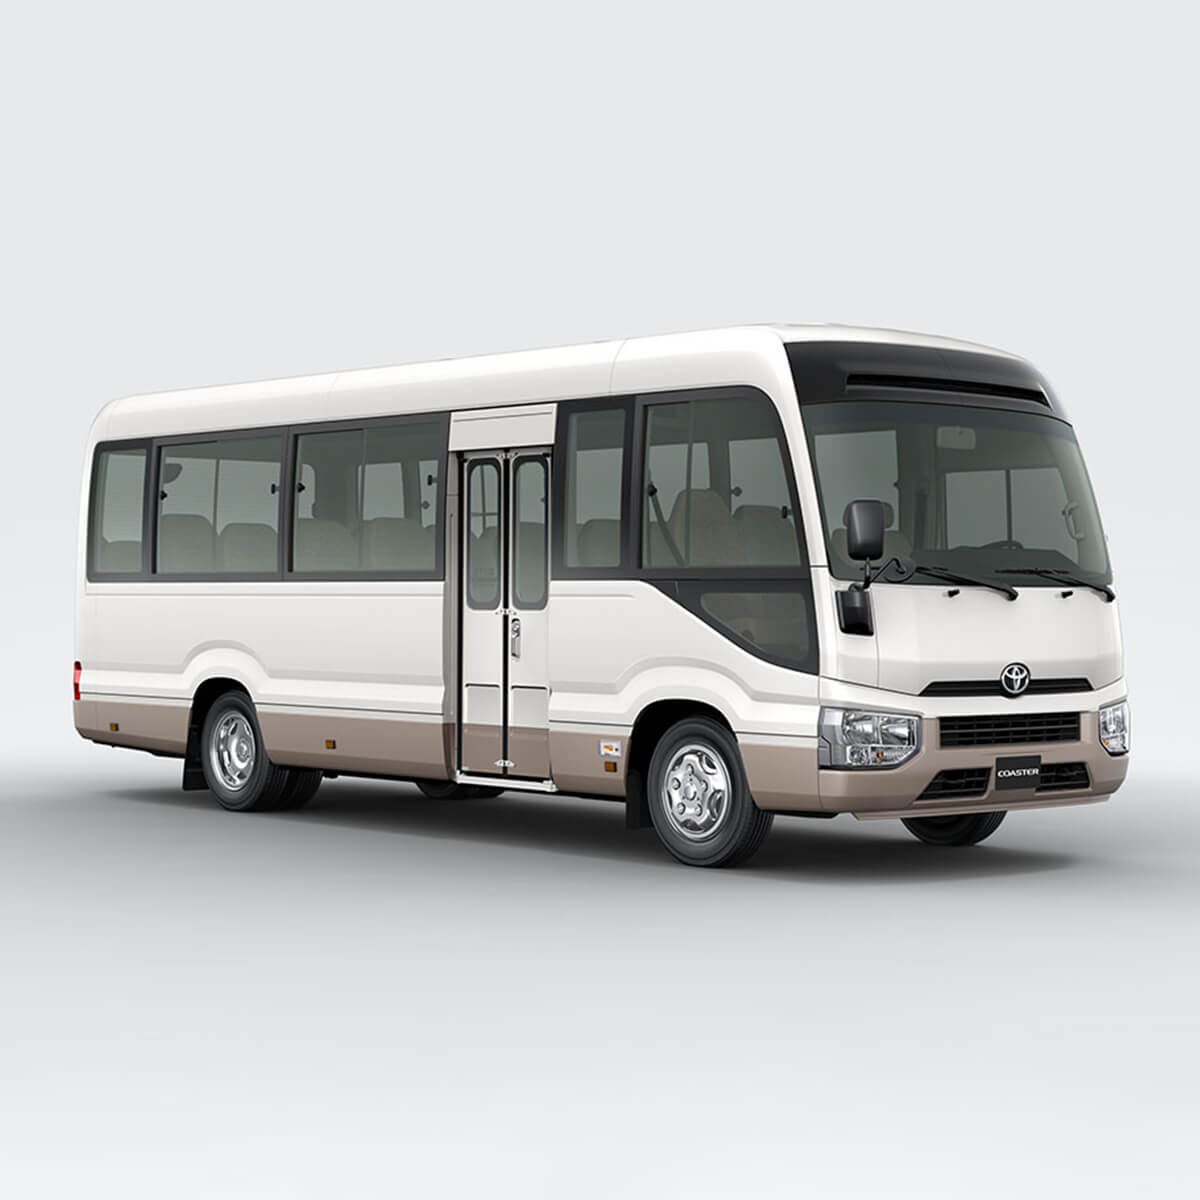 Toyota Coaster Specifications